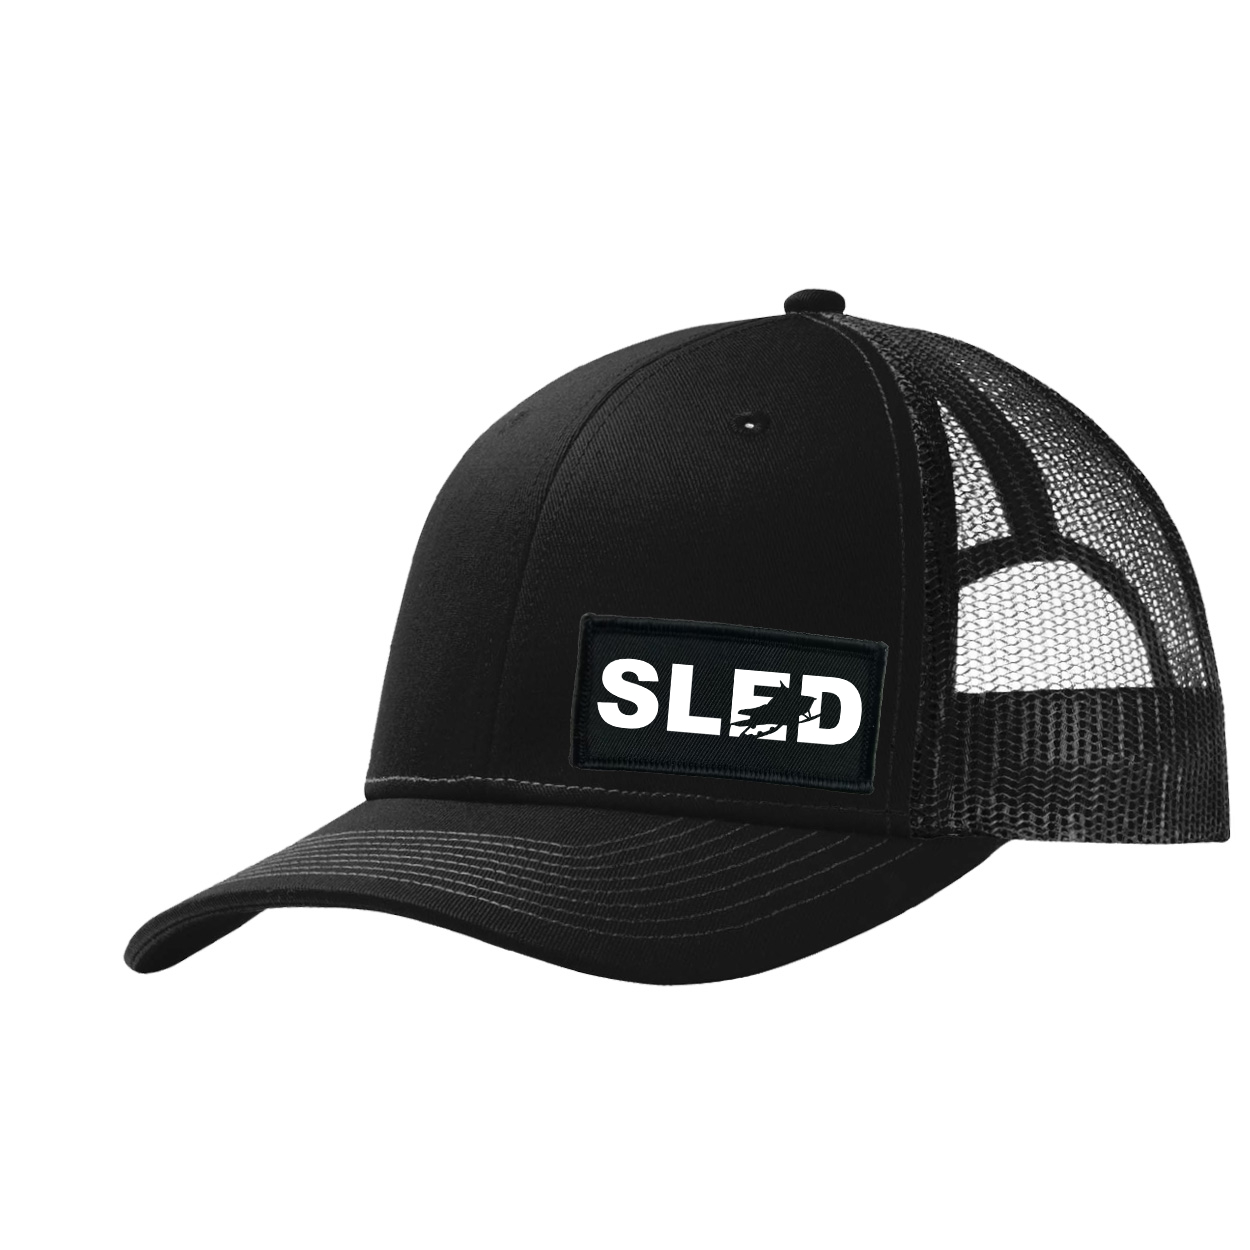 Sled Snowmobile Logo Night Out Woven Patch Snapback Trucker Hat Black (White Logo)